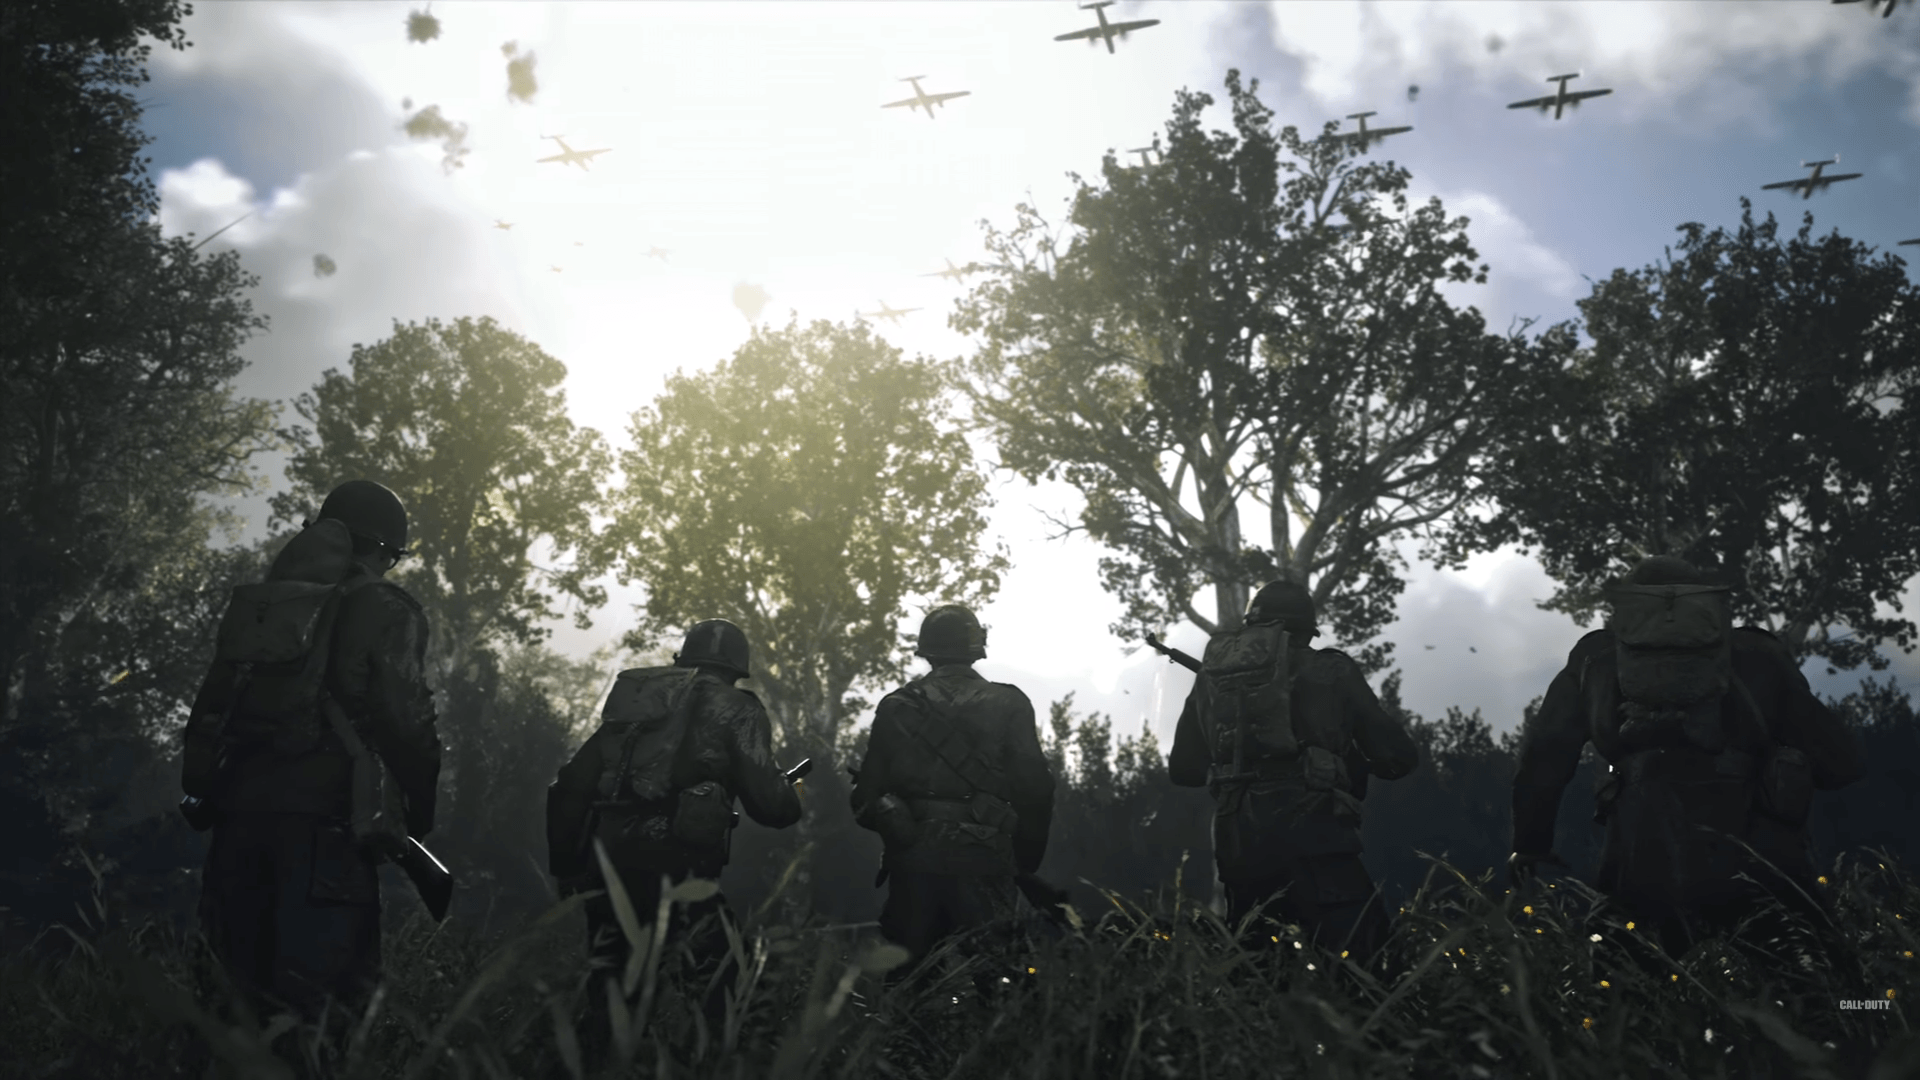 Call of Duty: WWII HD Wallpaper and Background Image